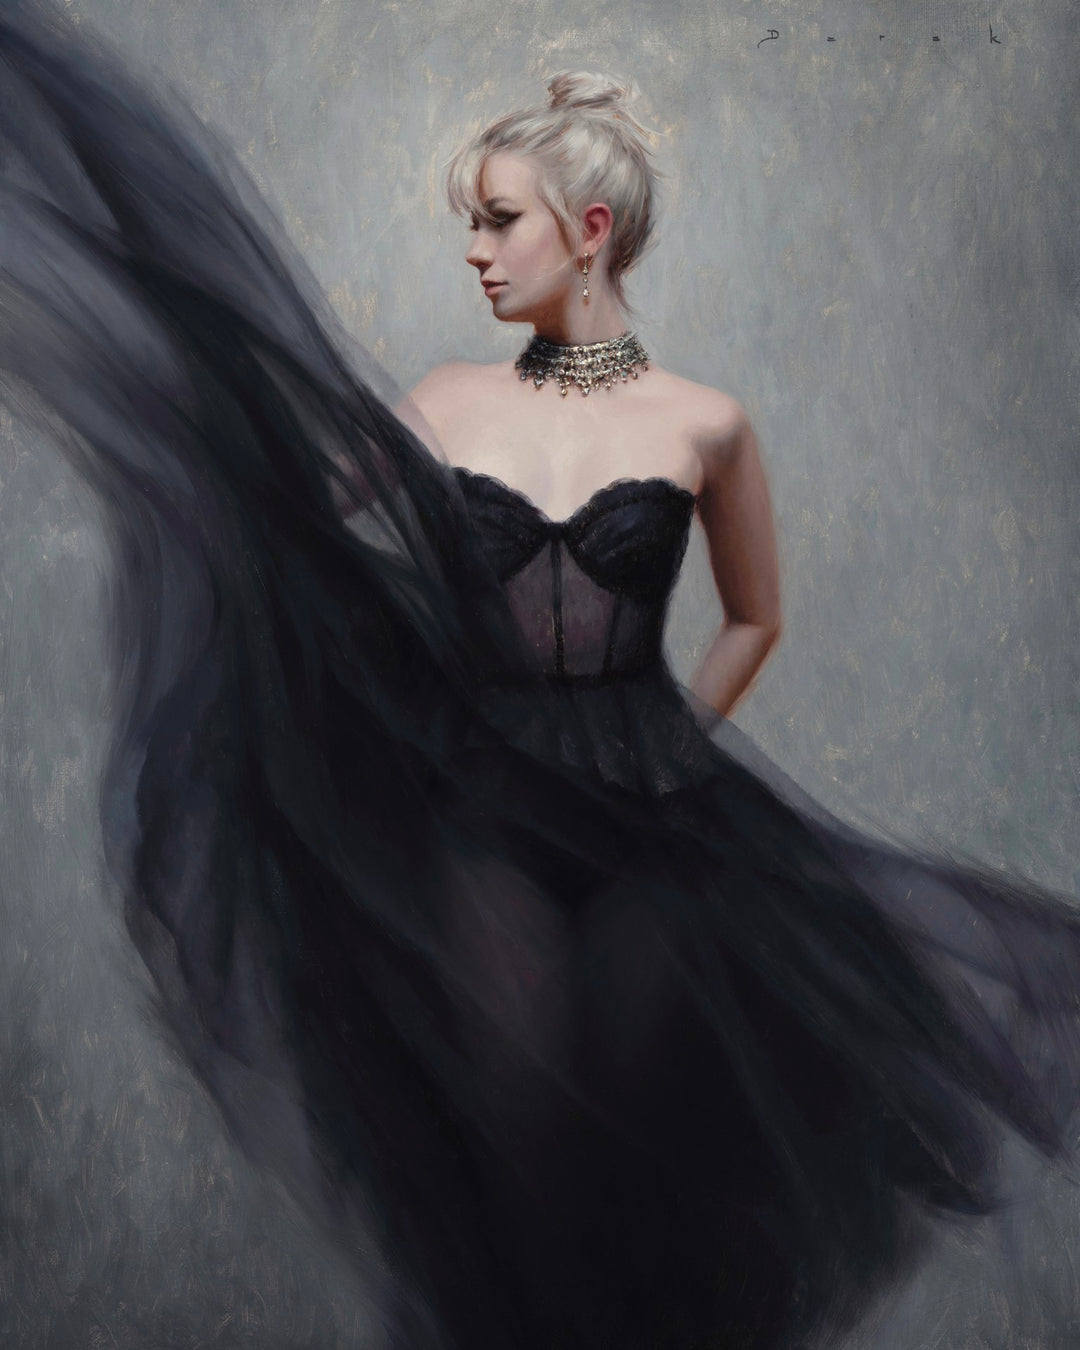 Derek Harrison's "Platinum" painting captures the elegance of a woman in a stunning black dress. Created with meticulous detail, this oil on linen masterpiece showcases Derek Harrison's talent and skill.